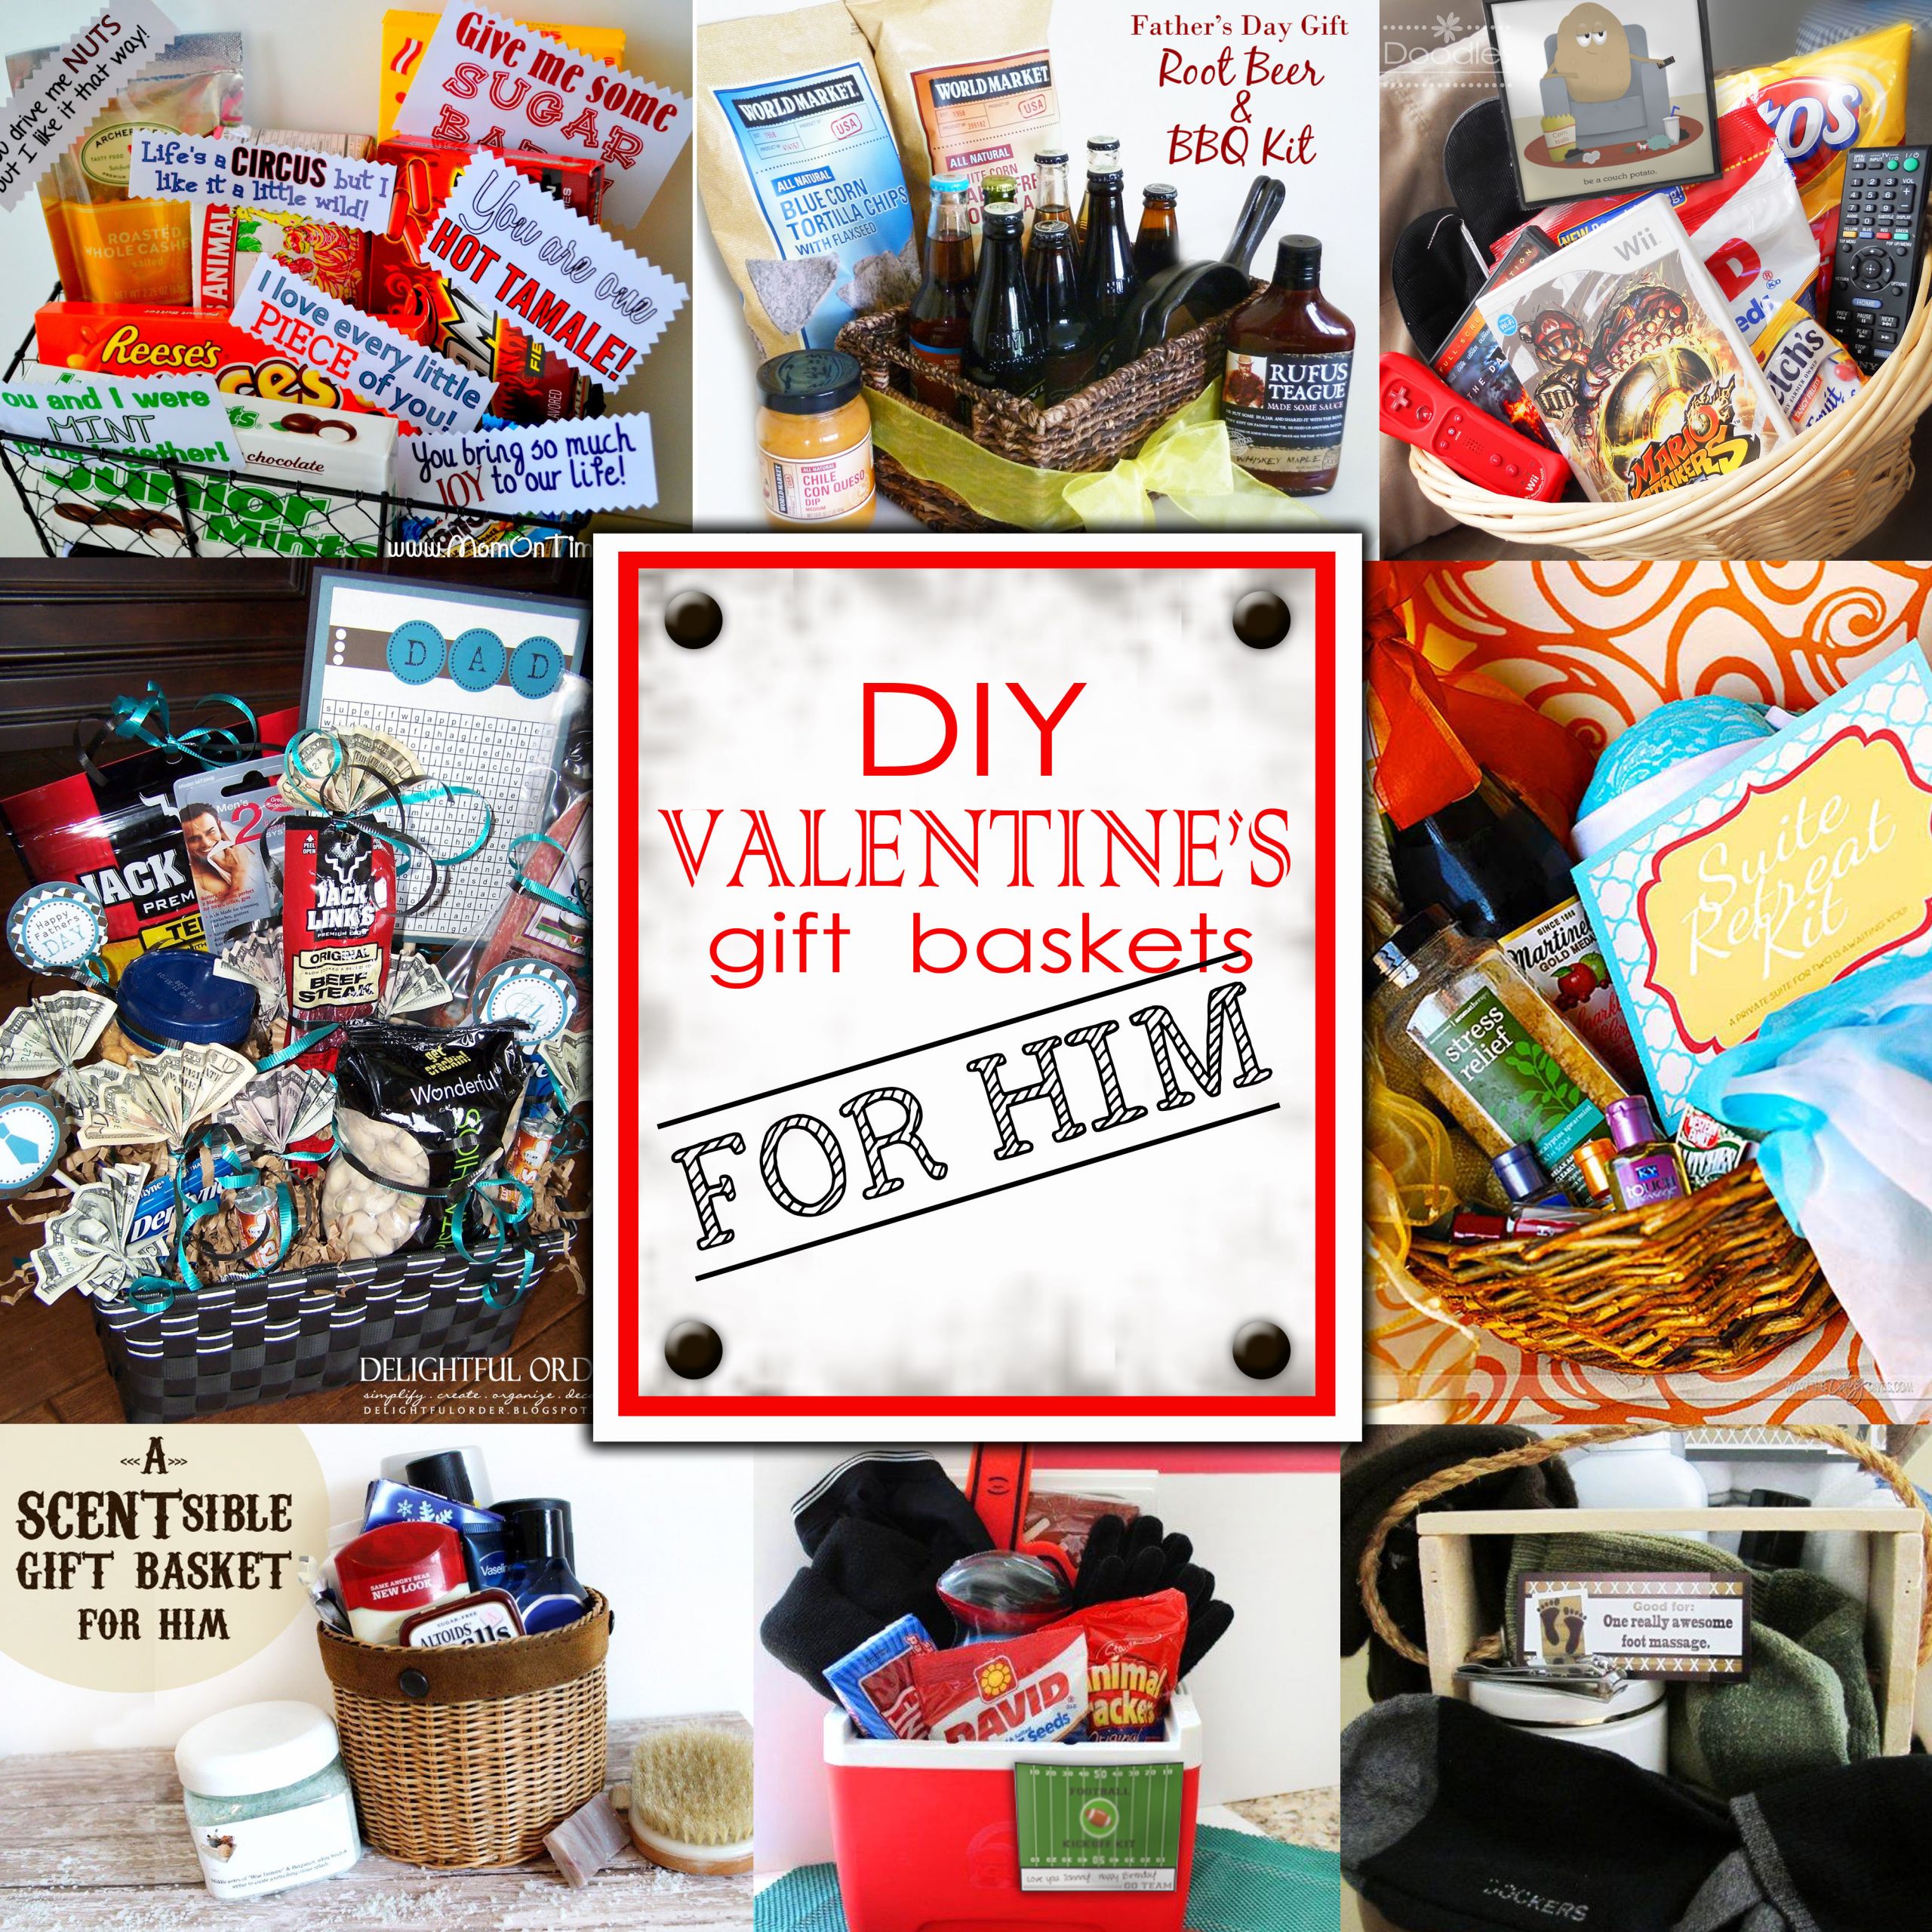 Valentines Gift Ideas for Him Homemade New Diy Valentine S Day Gift Baskets for Him Darling Doodles